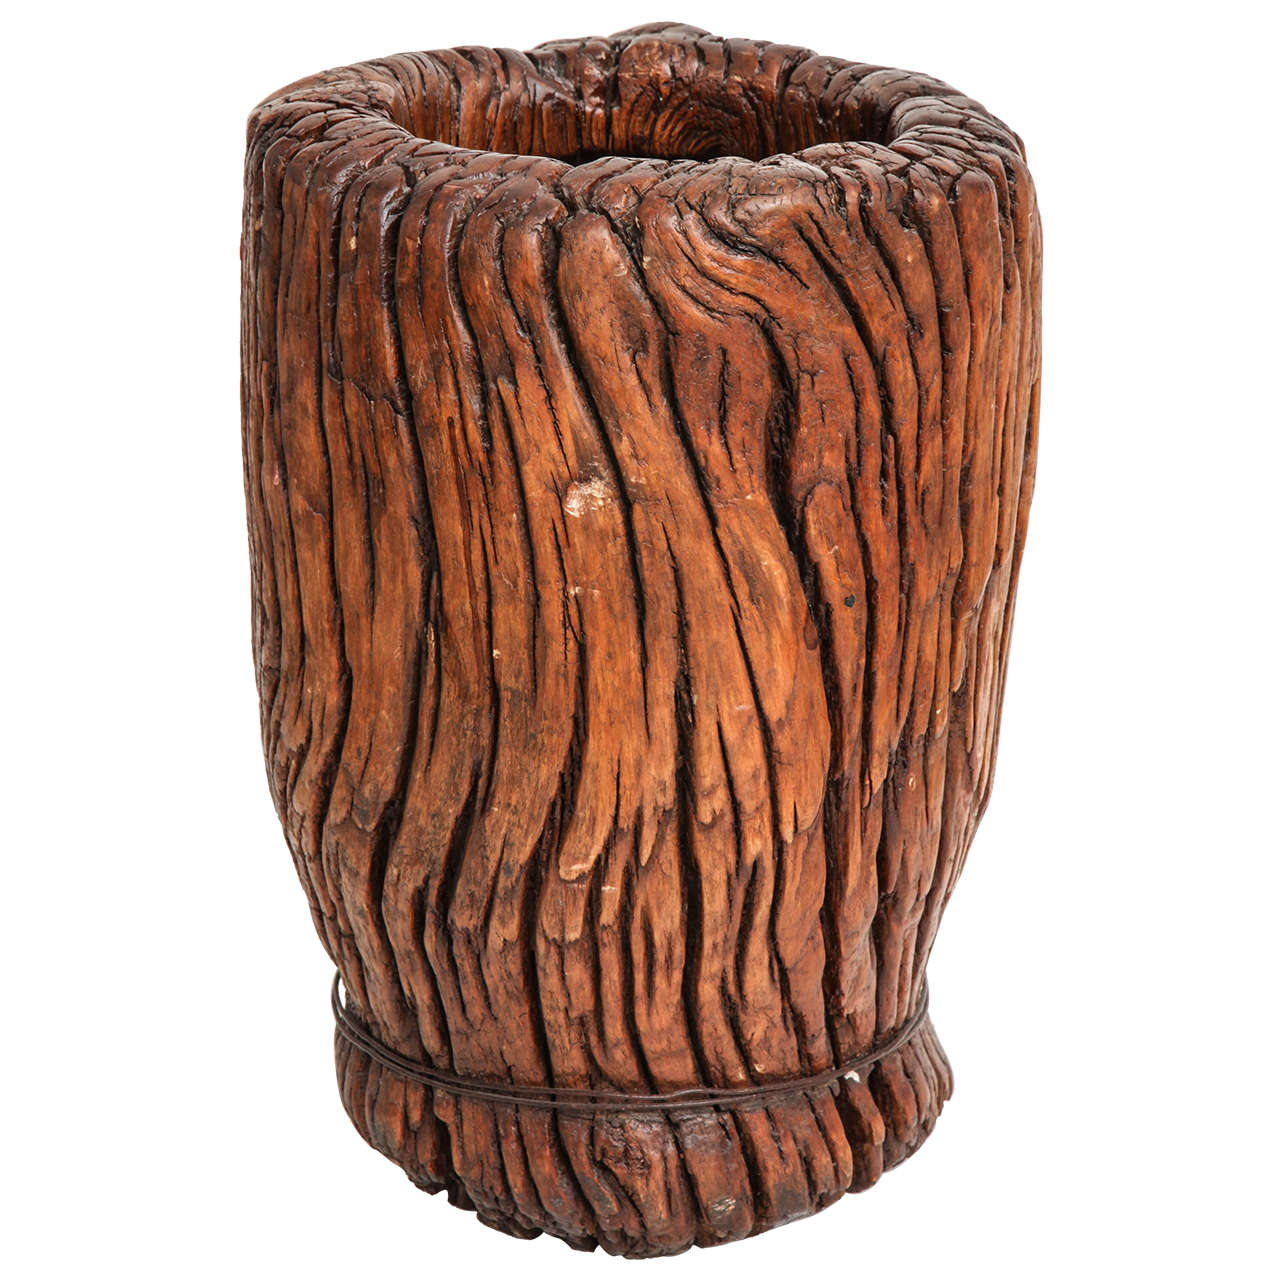 A Japanese rootwood vessel